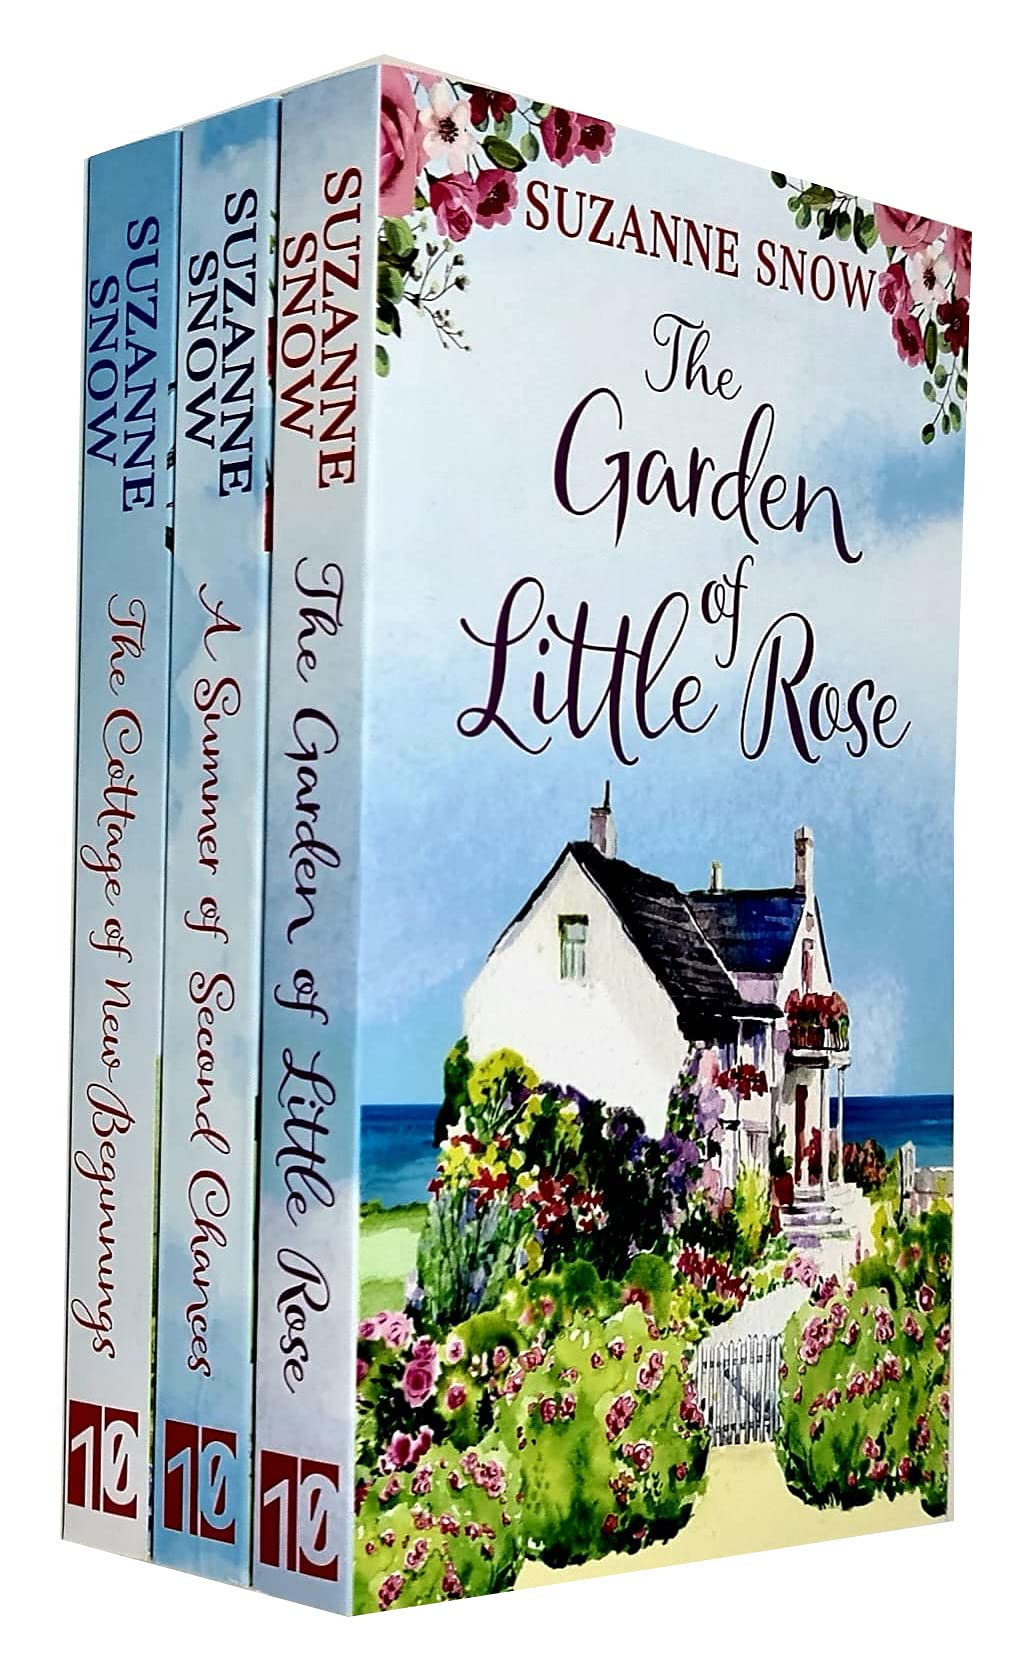 Suzanee Snow Welcome to Thorndale Series Collection 3 Book Set, Garden of Little Rose - Lets Buy Books